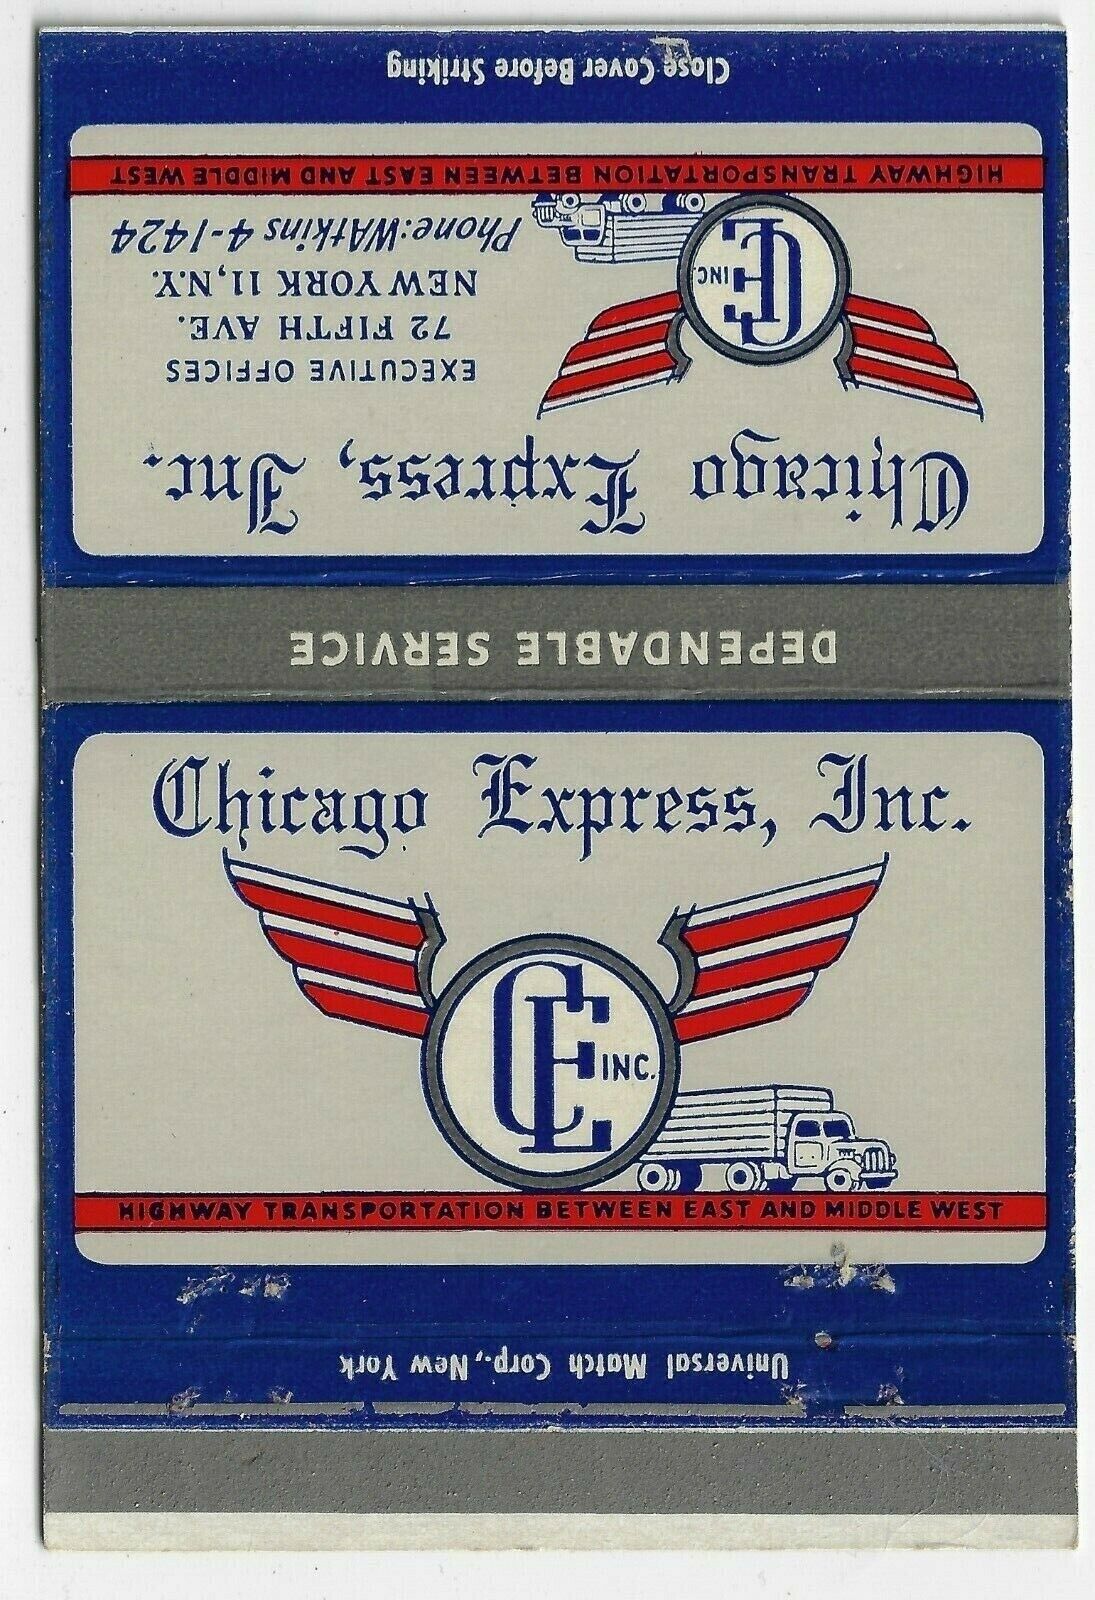 Chicago Express Inc. NYC Royal Flash Billboard FS 40S Empty Matchcover